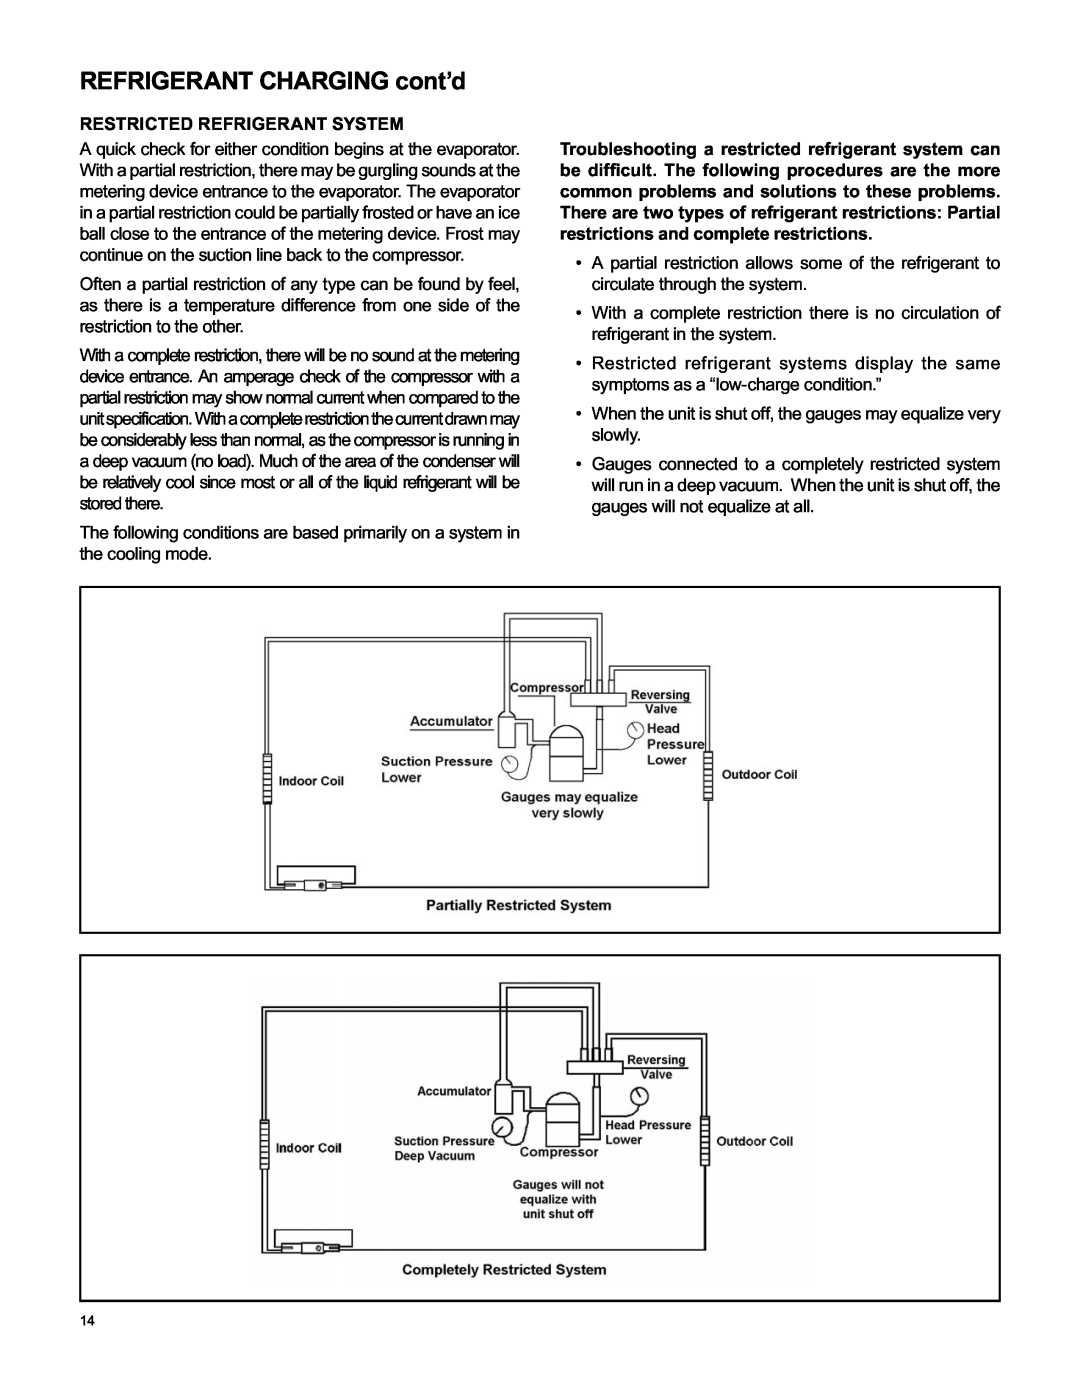 Friedrich RAC-SVC-06 service manual REFRIGERANT CHARGING cont’d, Restricted Refrigerant System 